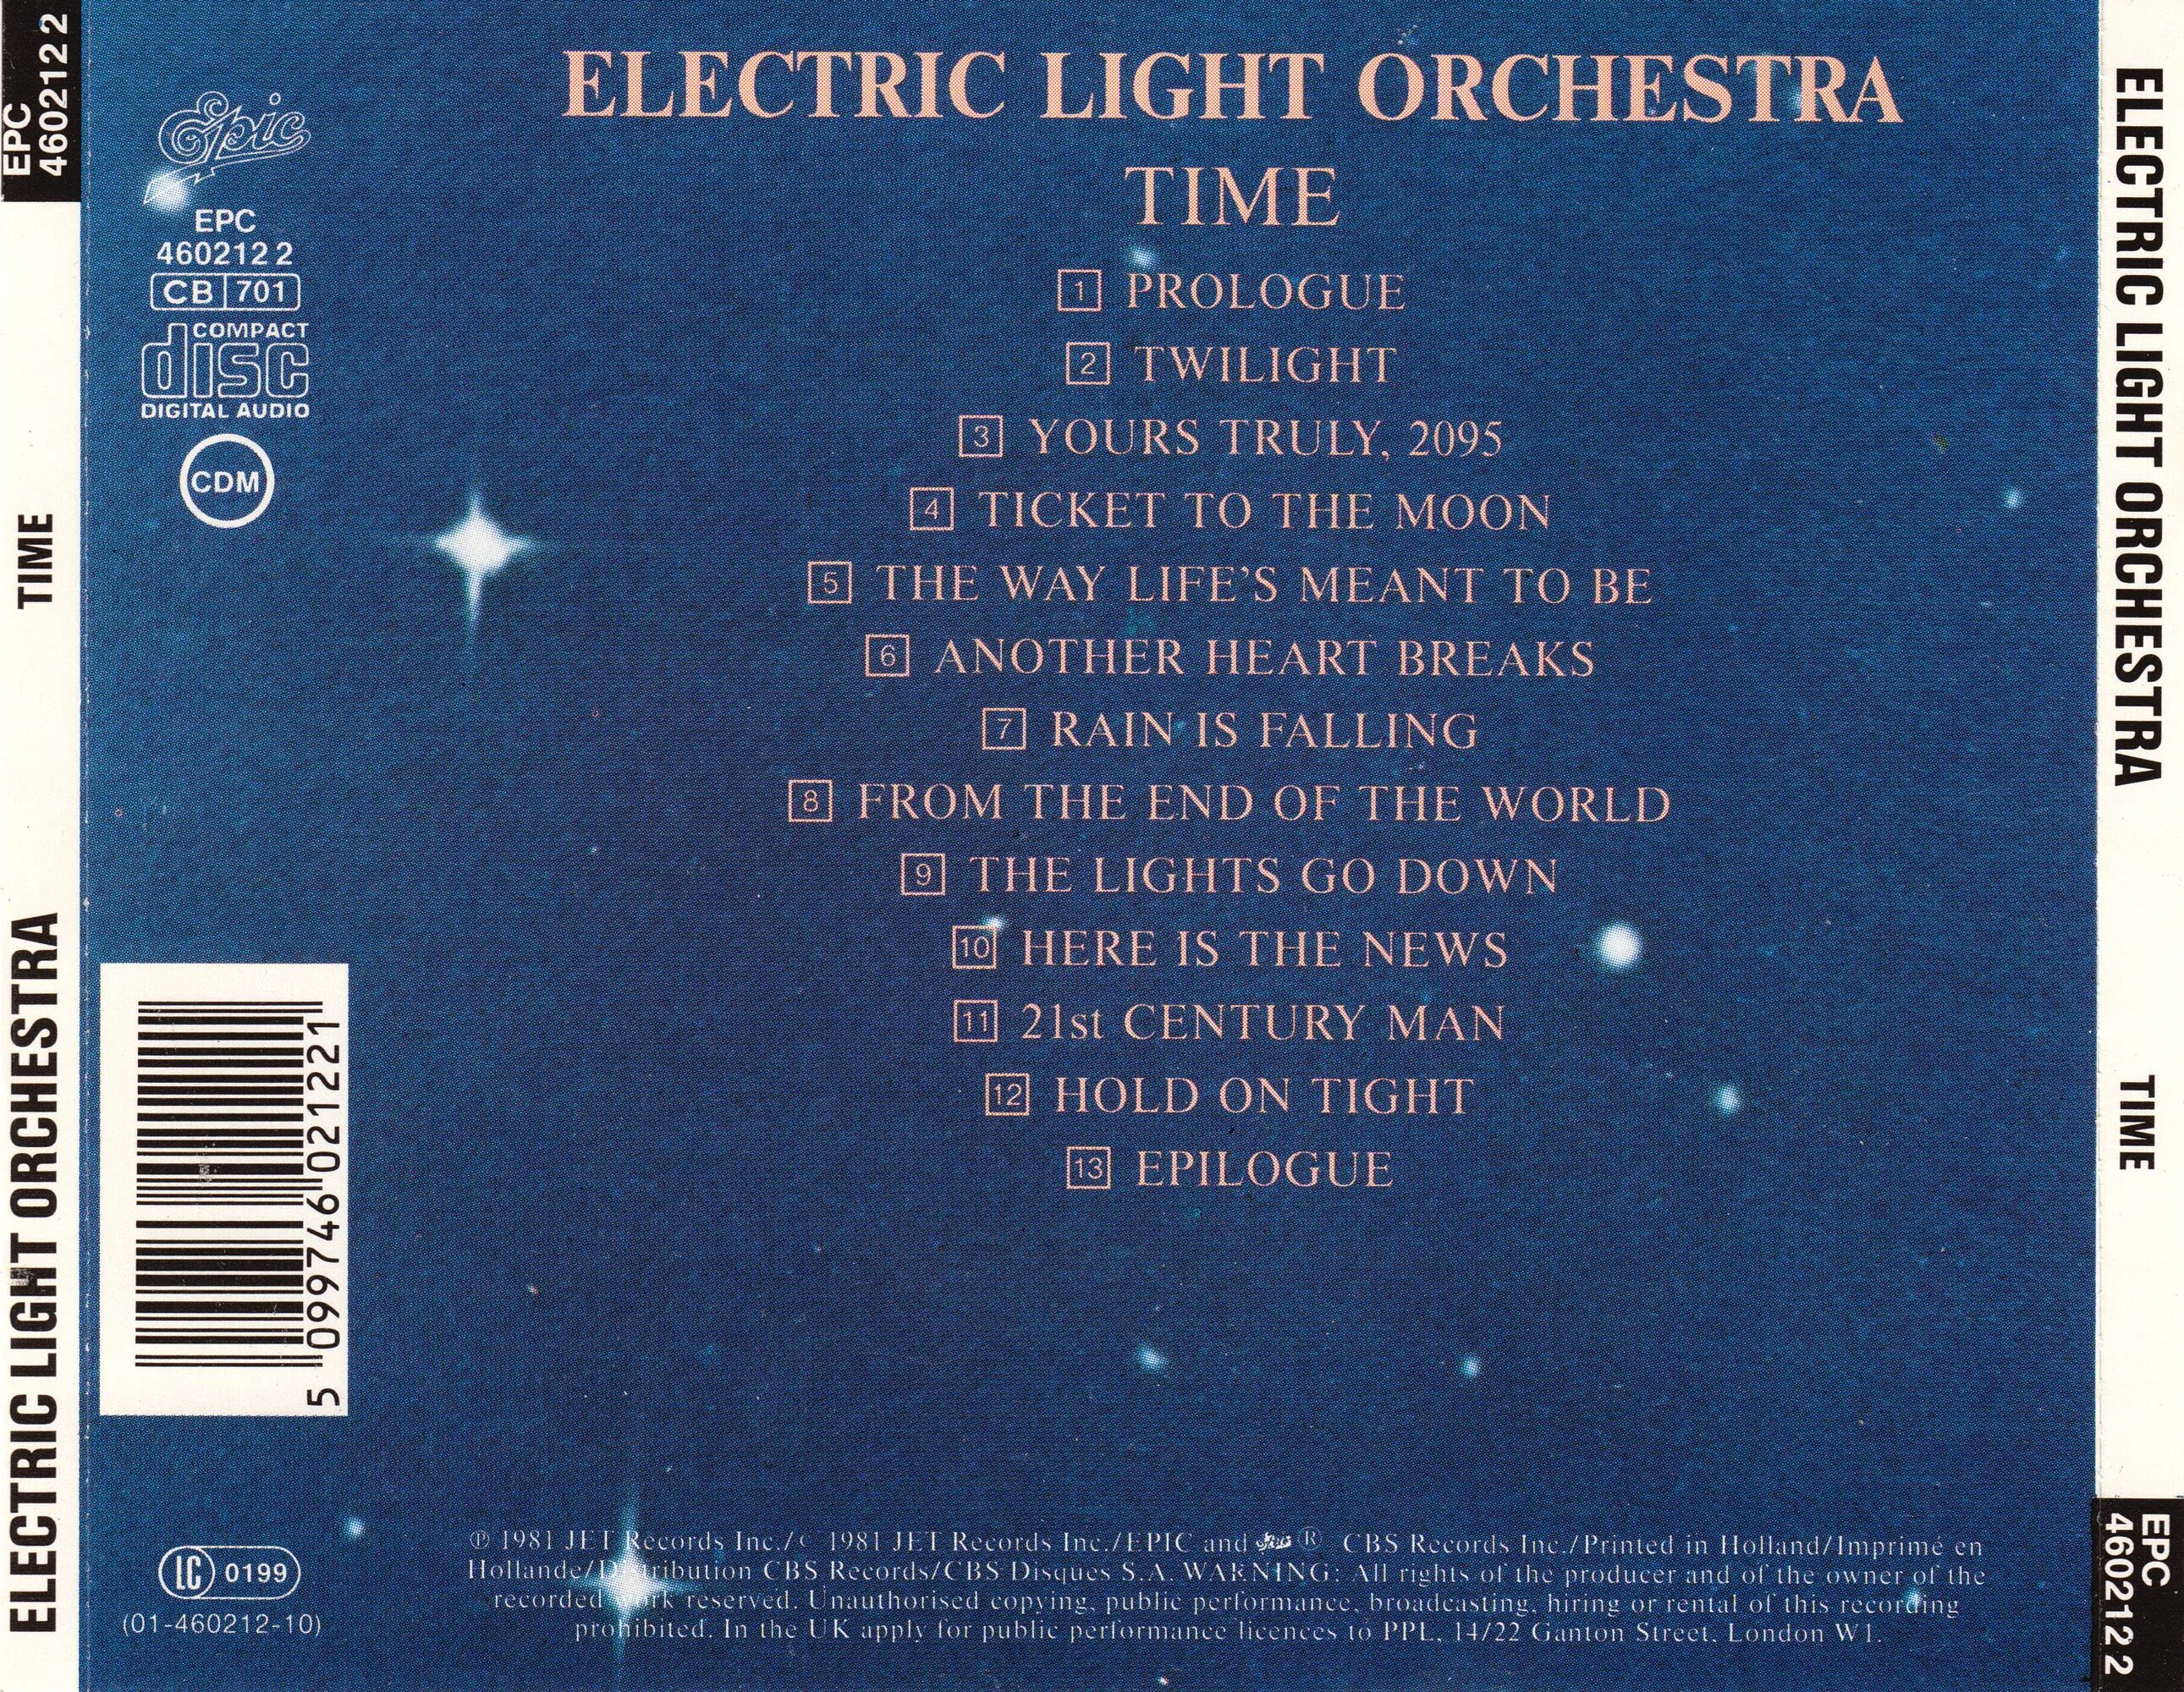 Electric Light Orchestra time 1981. Electric Light Orchestra time обложка. Electric Light Orchestra - time (1981-Japan). Elo - time - 1981 - LP.